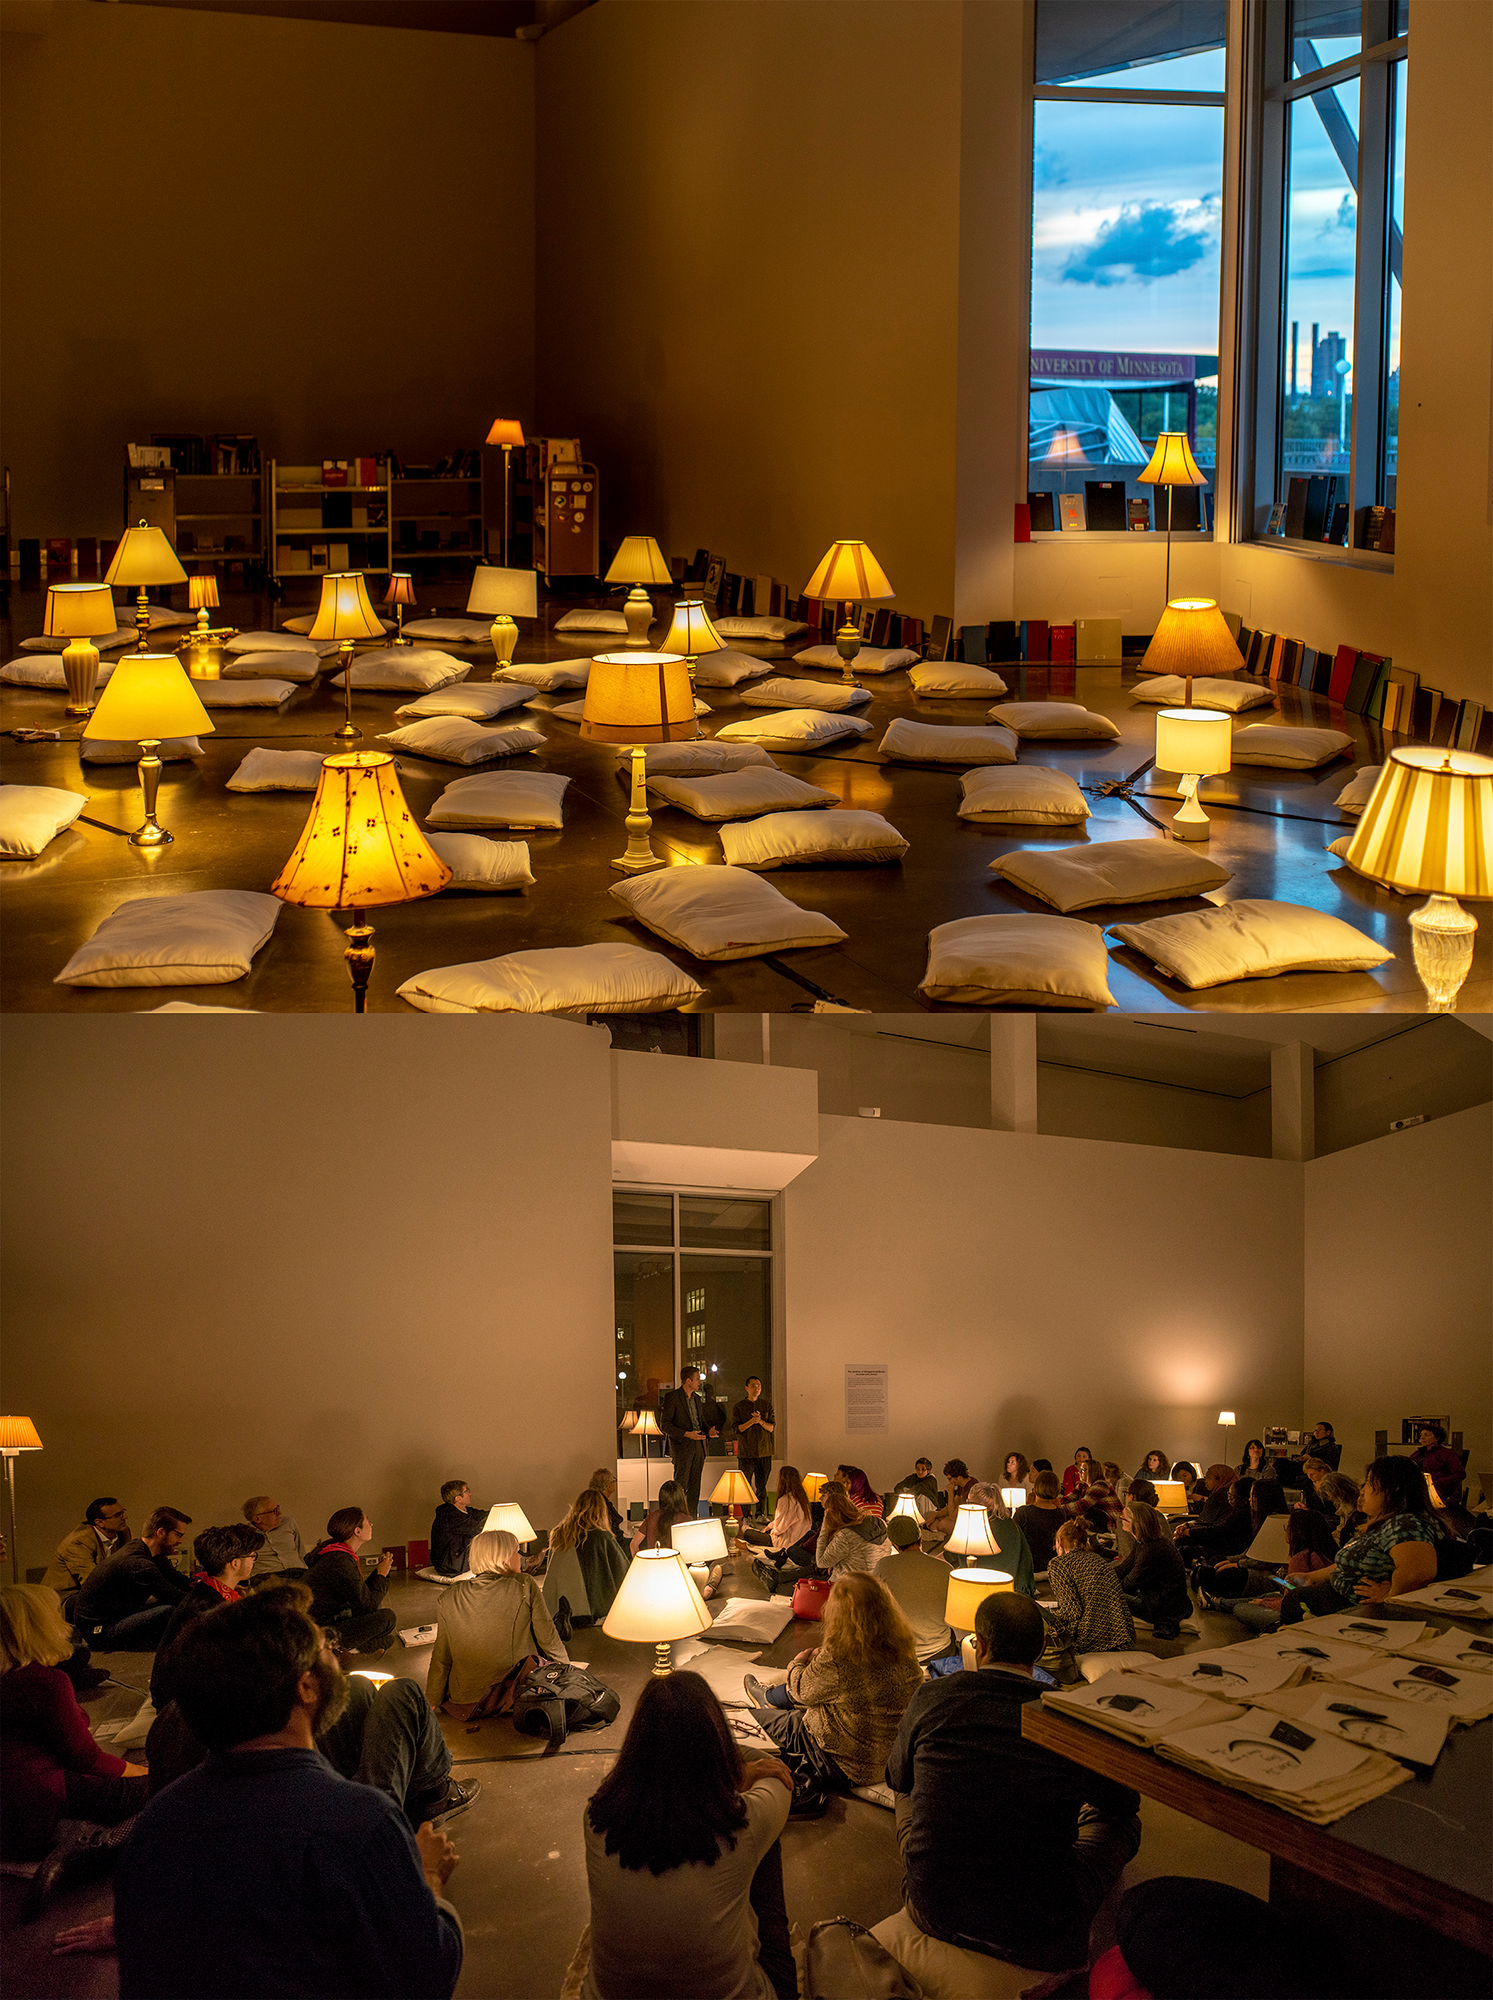 Two images, the top image is of a floor with well-placed pillows and lamps, the bottom image is of people in that same room.